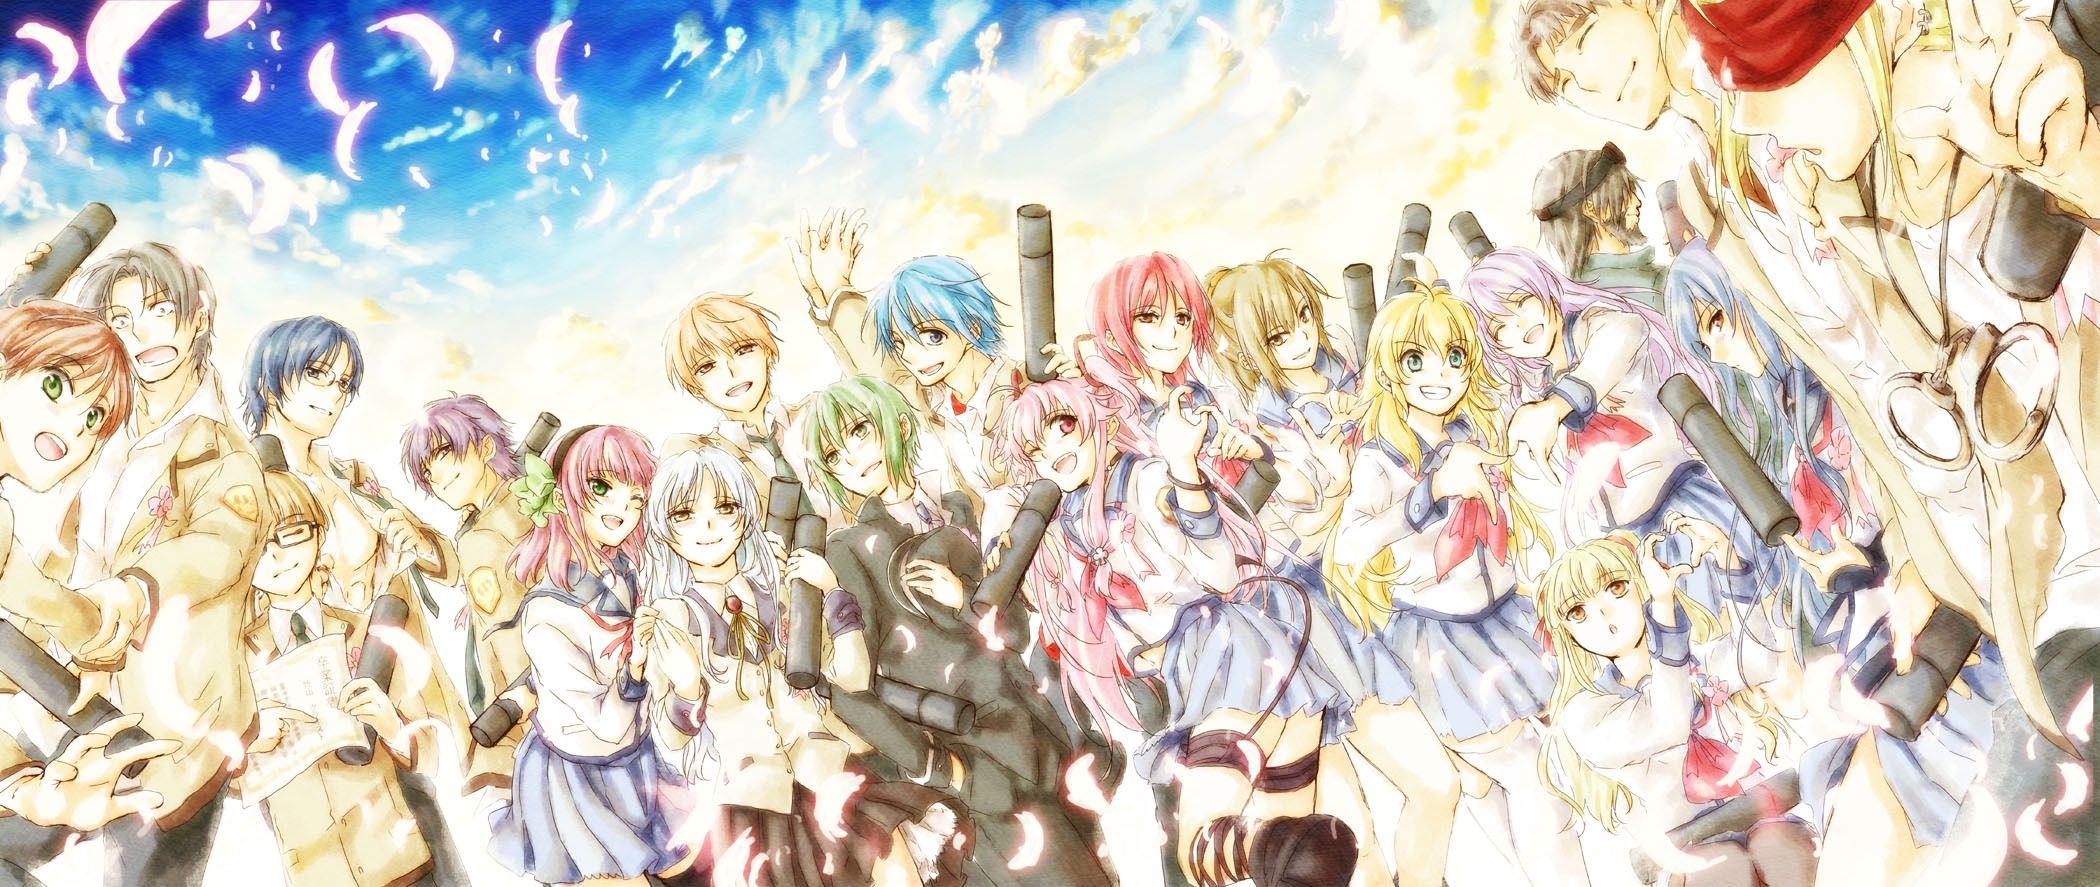 2100x887-9190-angel-beats-wallpaper-characters-other